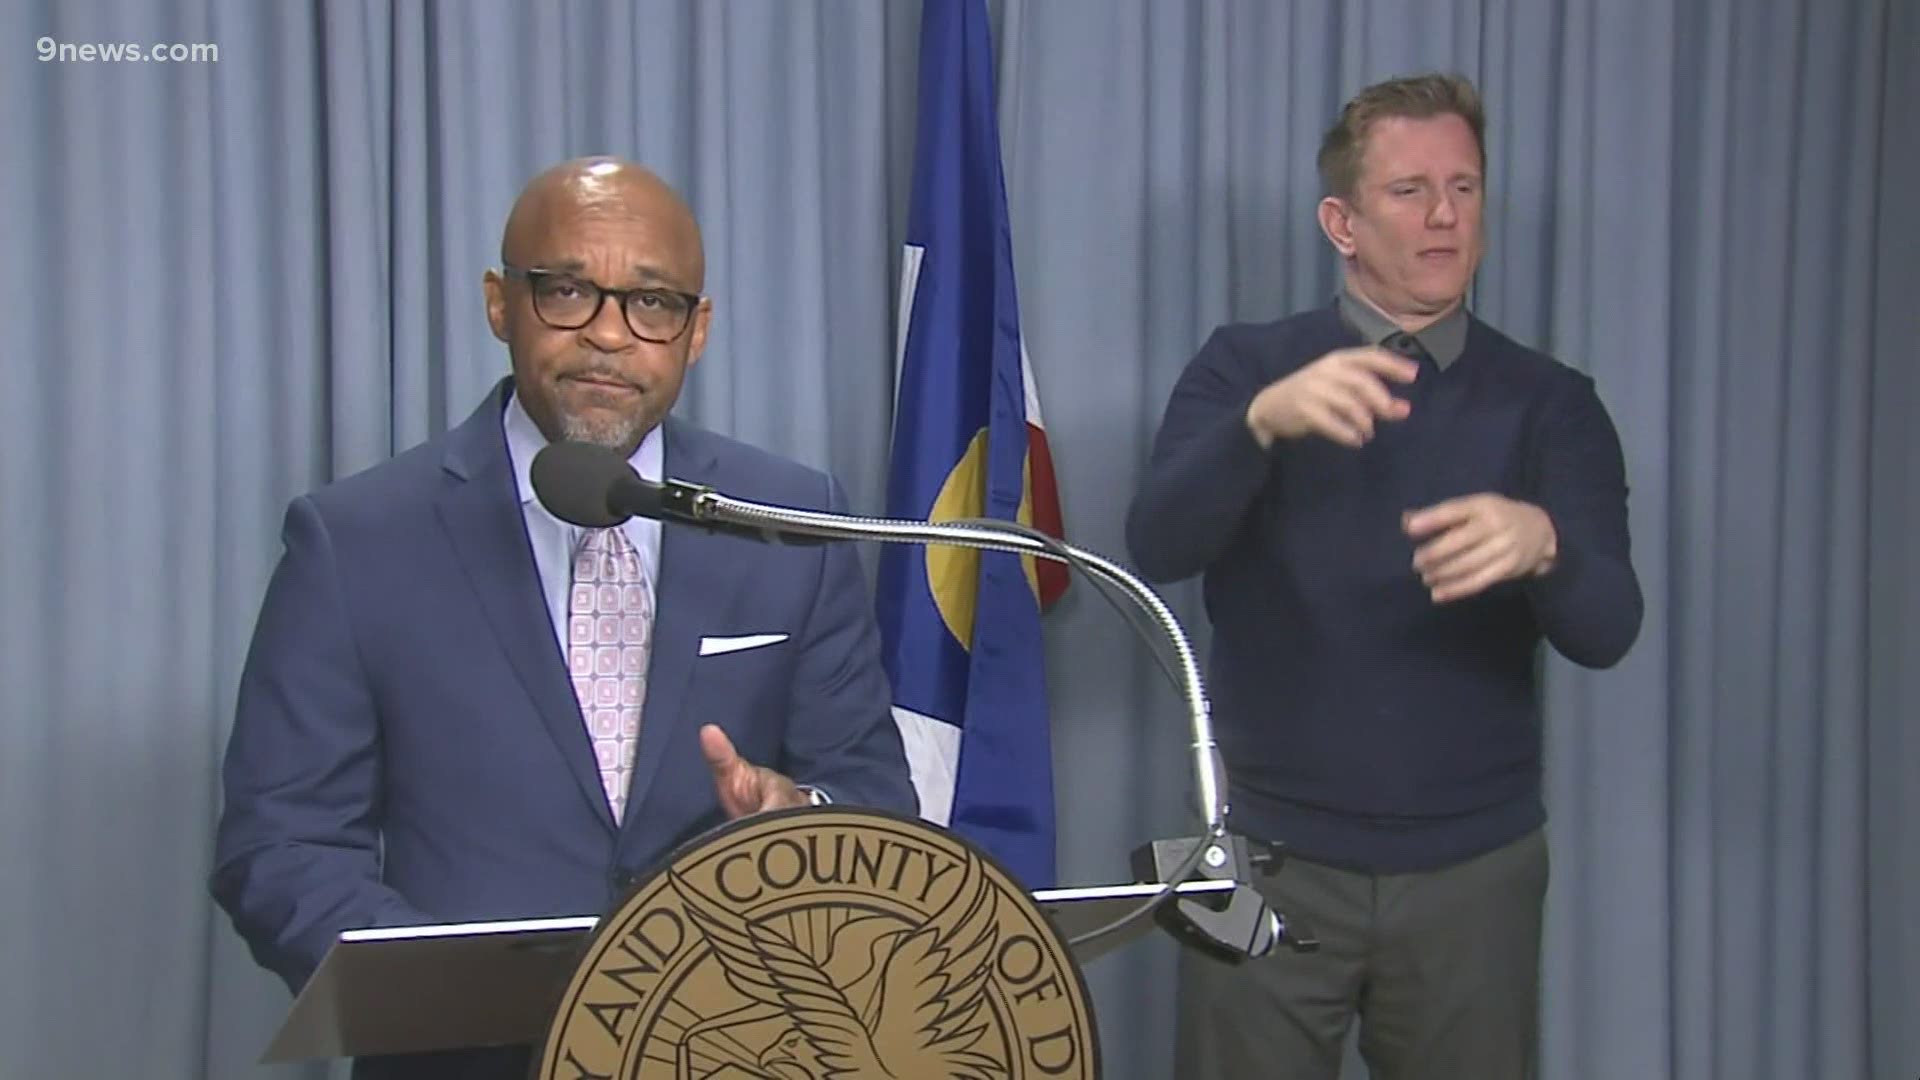 The National Western Complex will serve as an auxiliary shelter to house up to 600 men who are currently experiencing homelessness, the mayor announced Tuesday.